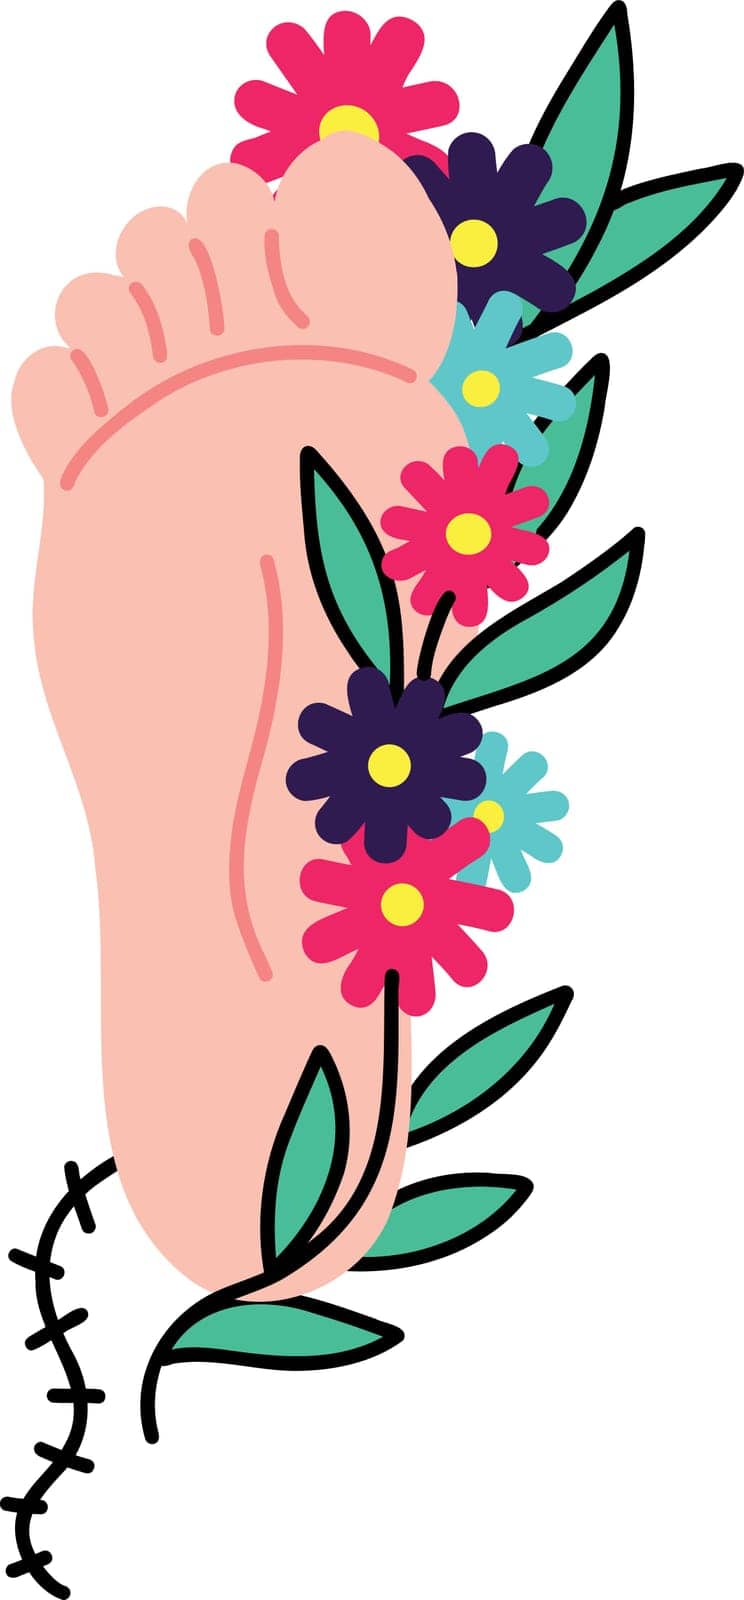 Foot and flowers vector illustration by Dustick